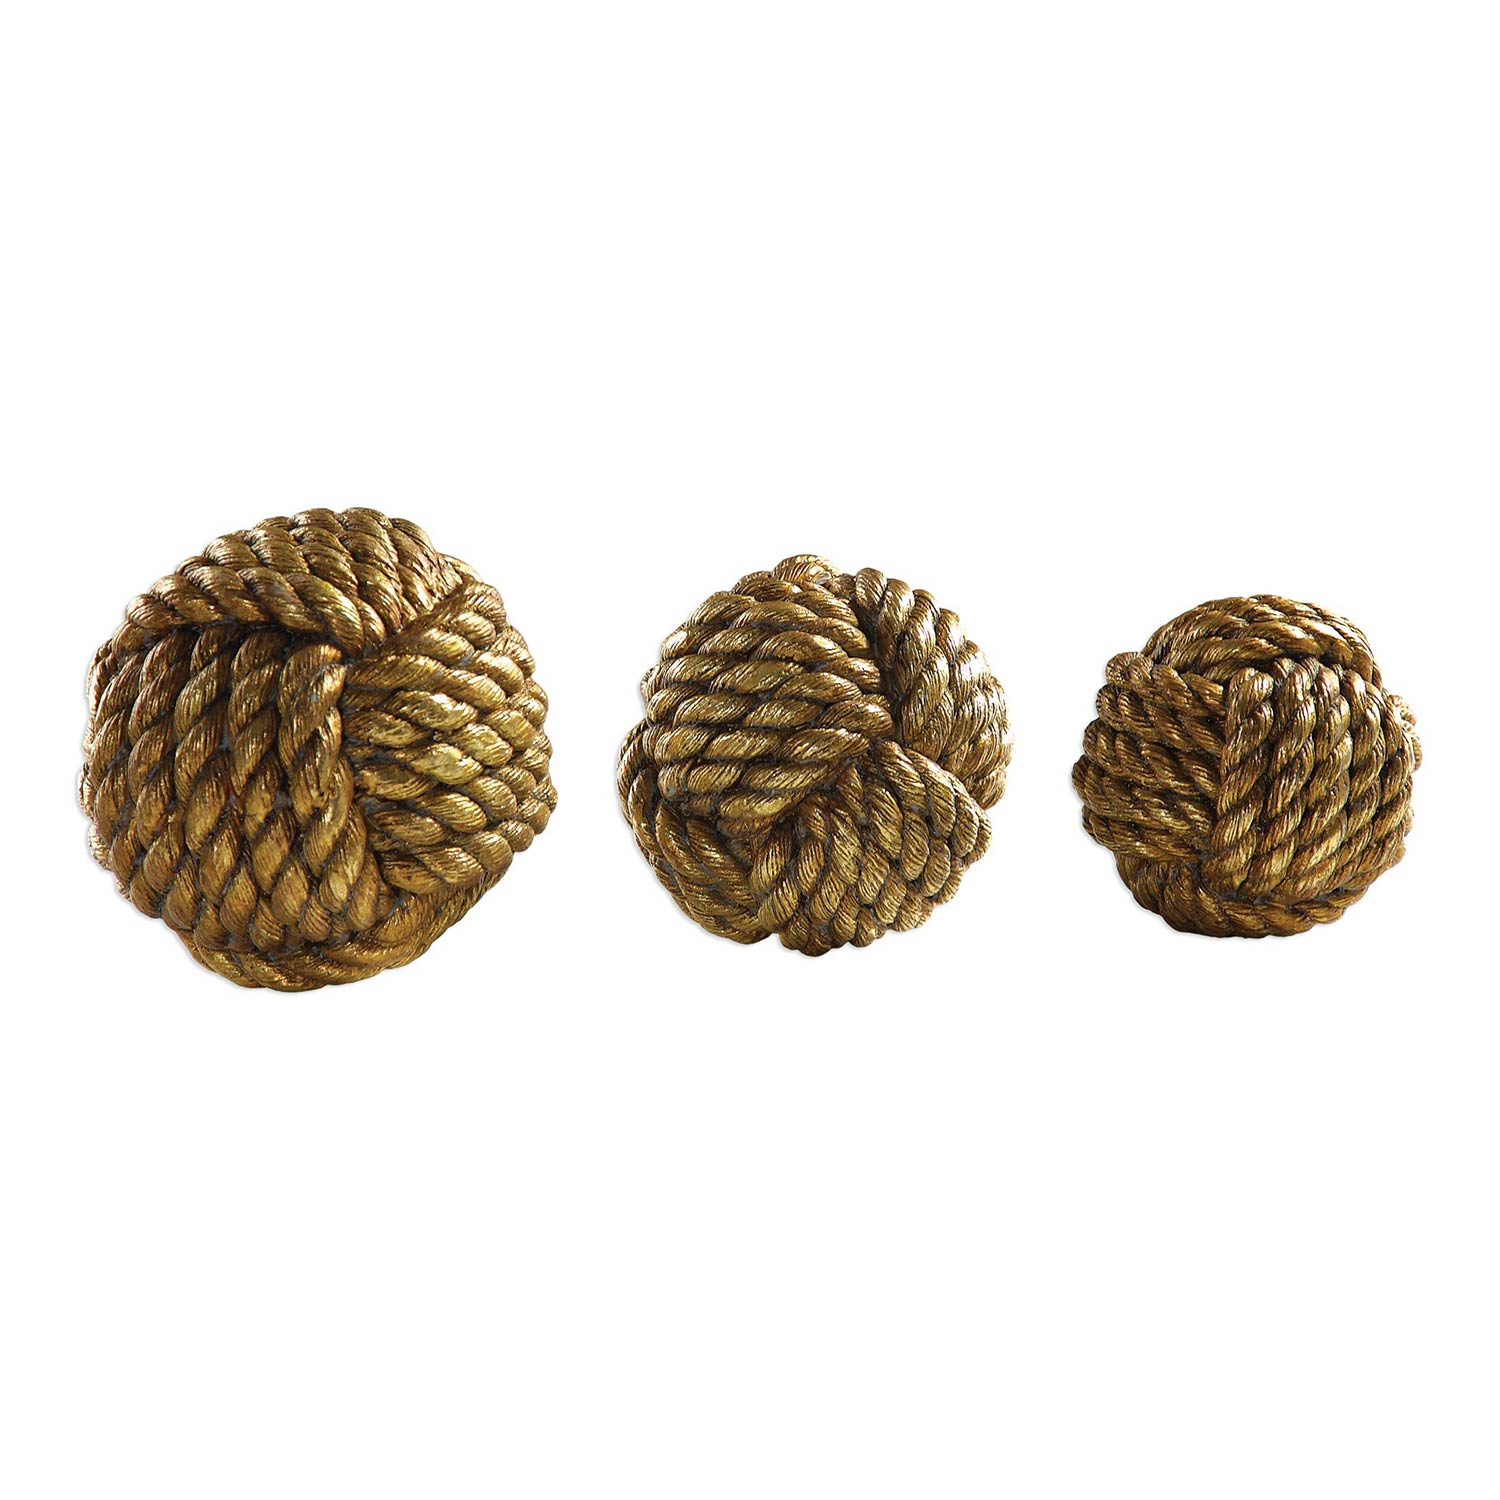 Uttermost Tali Rope Spheres - Set of 3